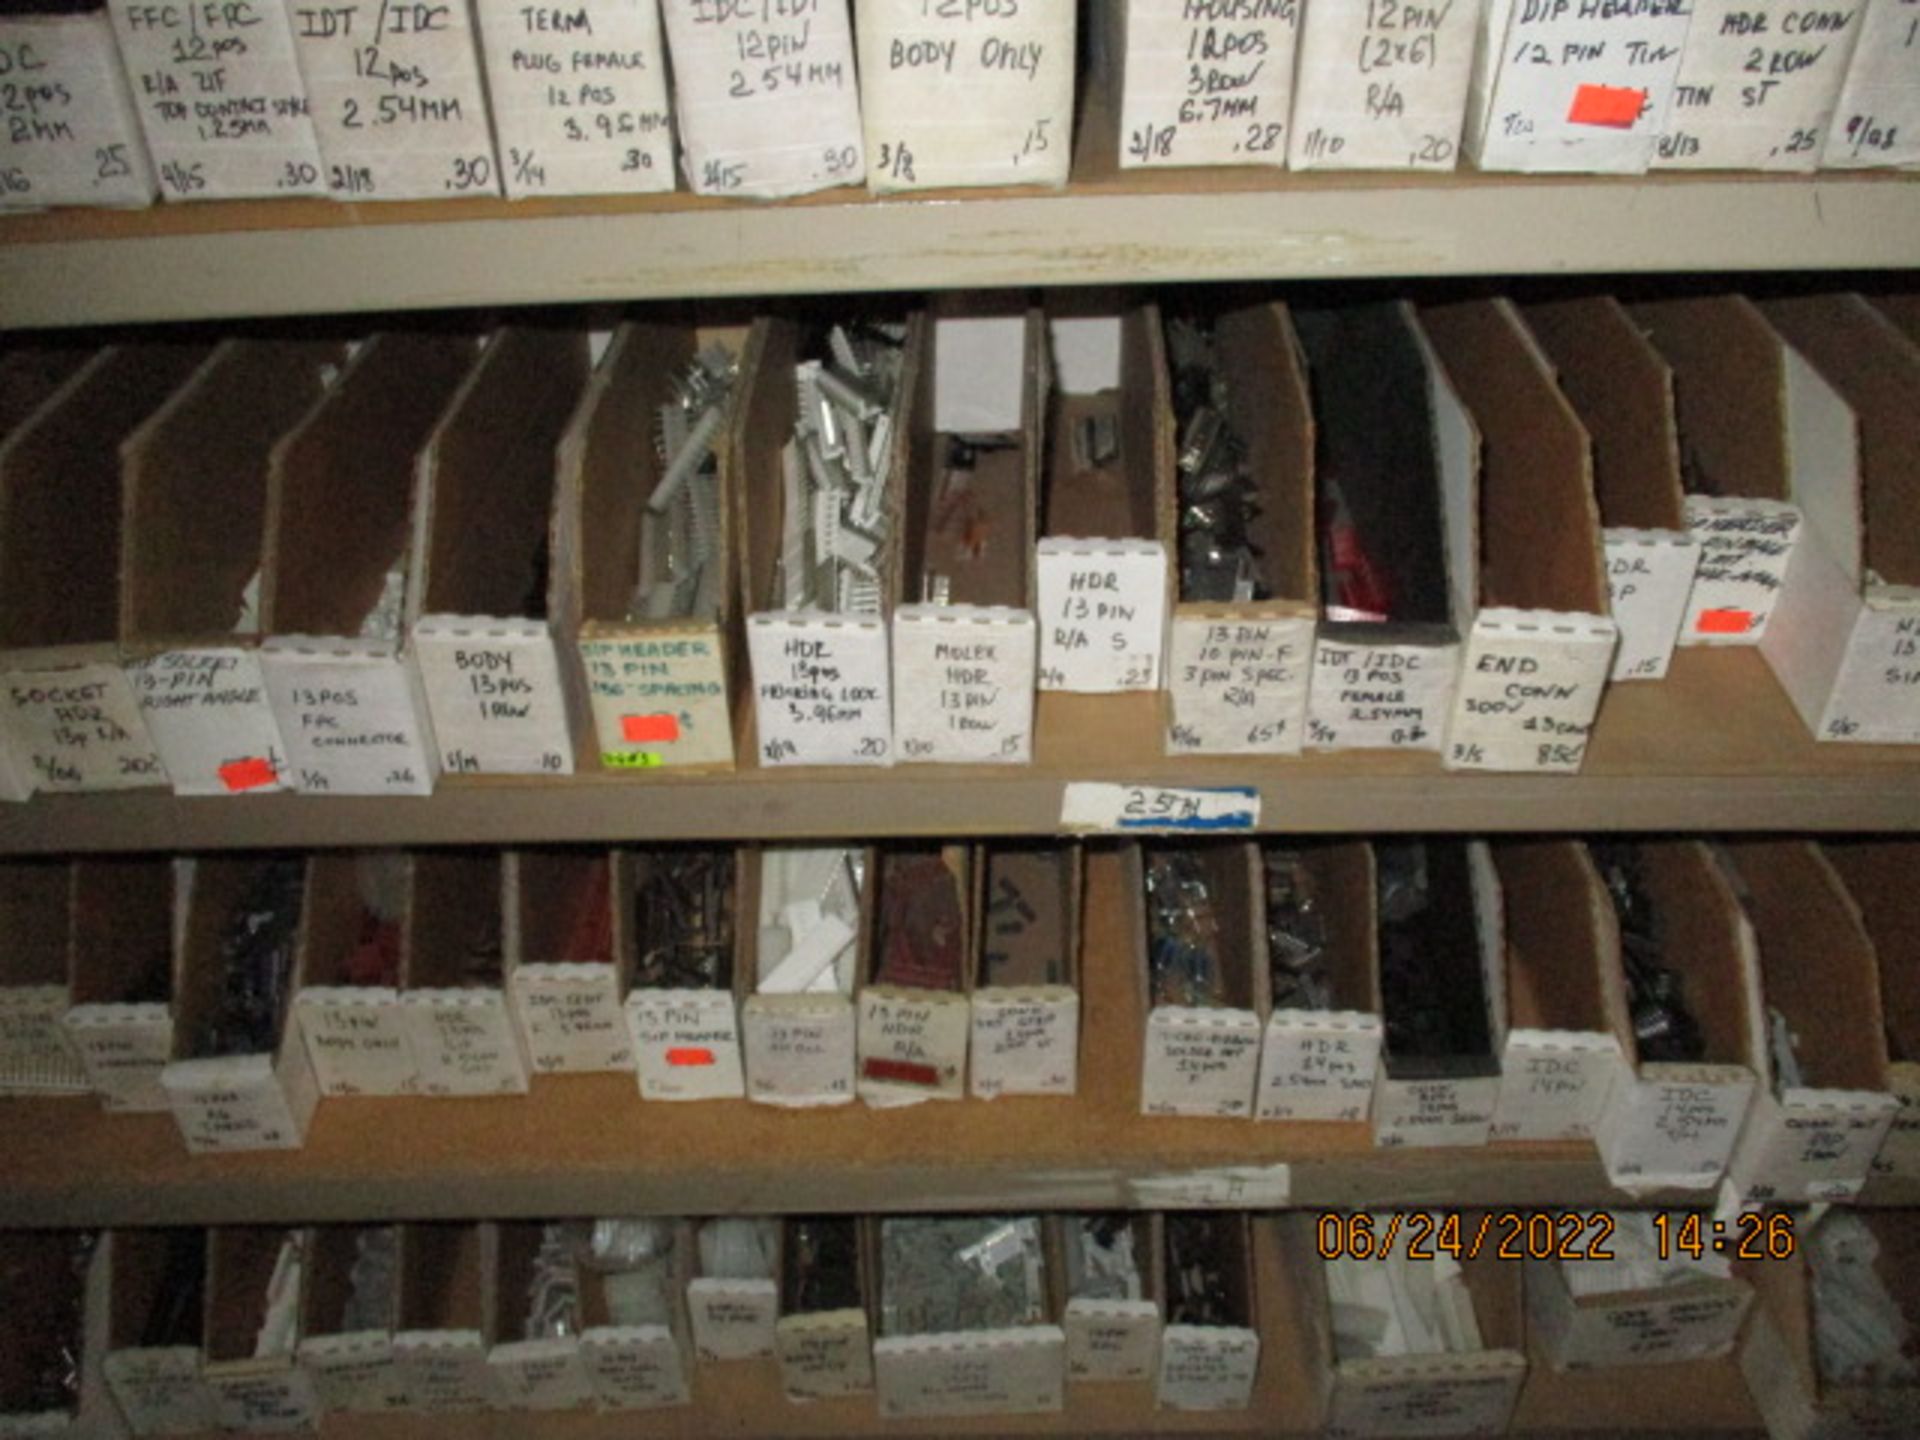 CONTENTS OF SHELVING UNIT CONSISTING OF 12, 13, & 14 PIN CONNECTORS - Image 6 of 7